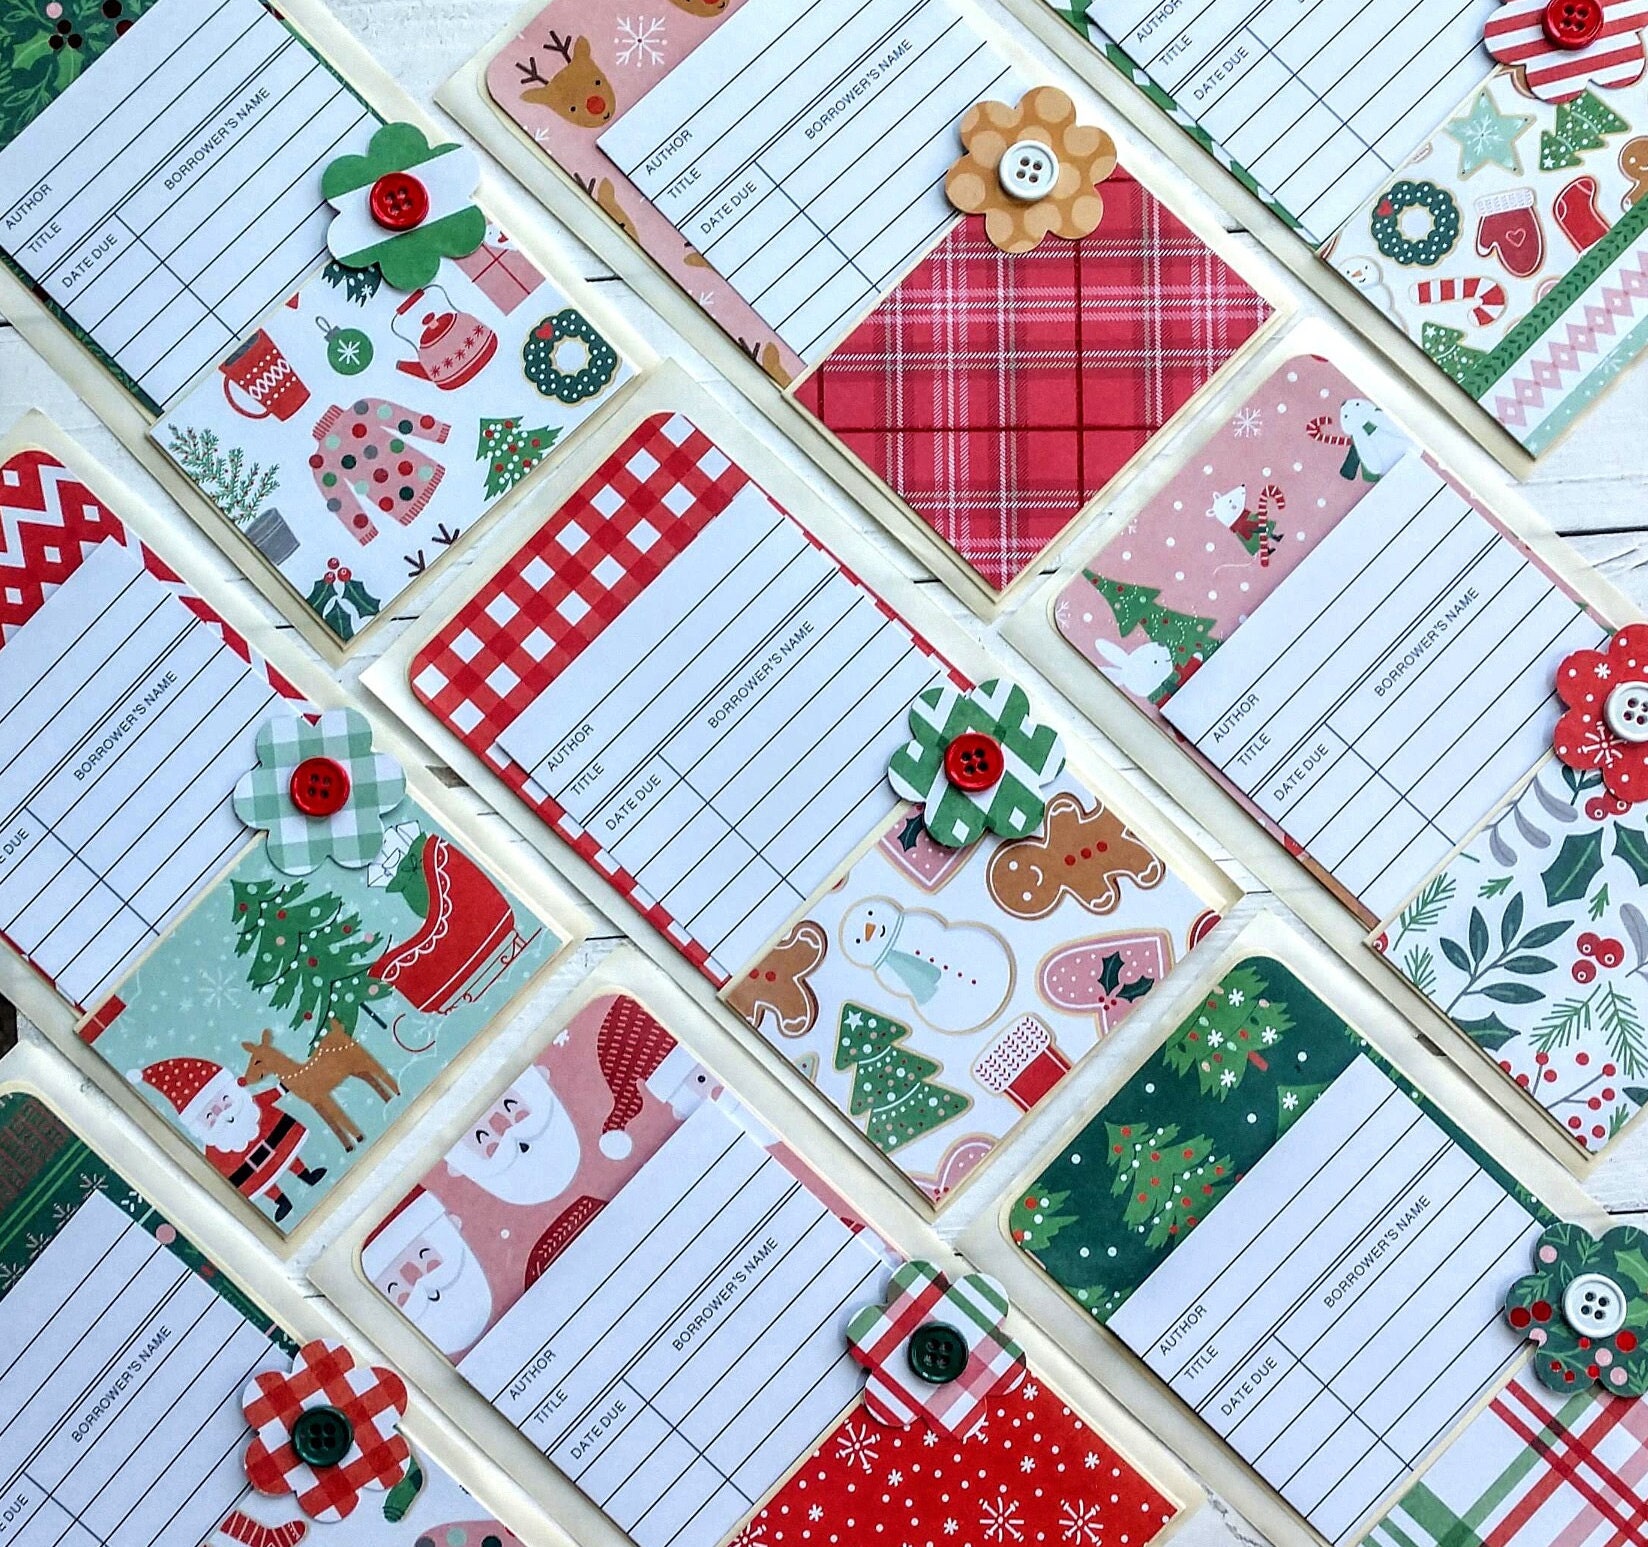 Cards and Pockets - Patterned Paper